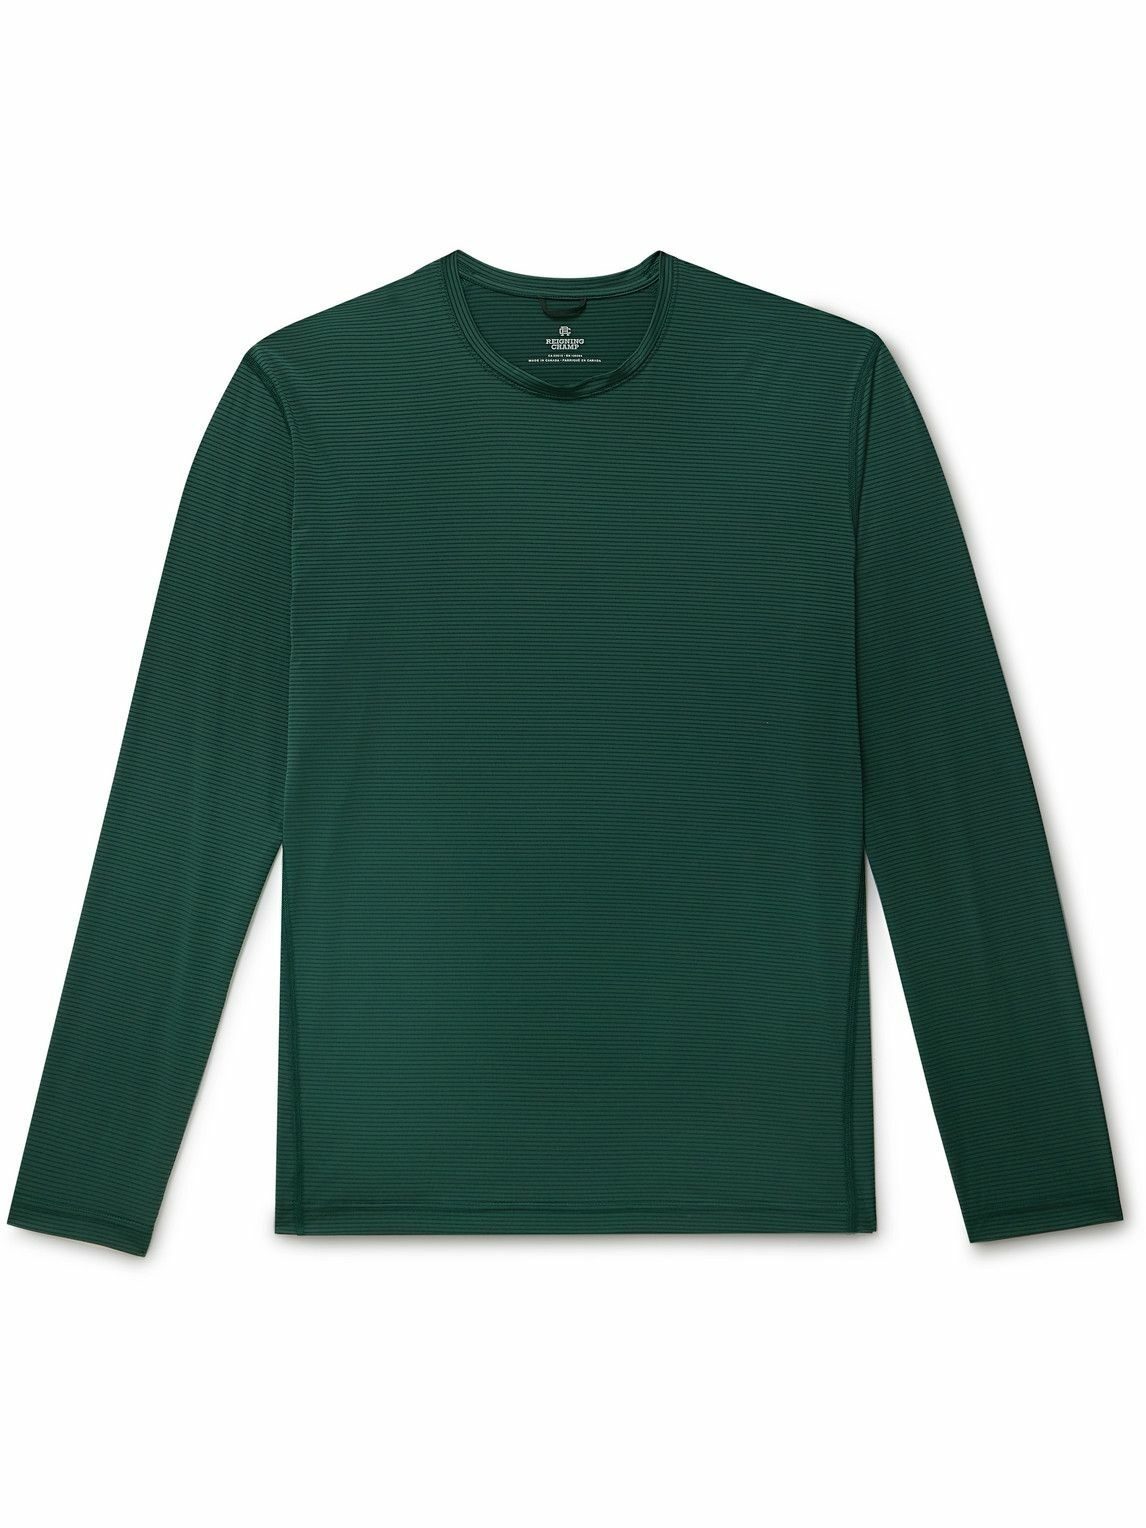 Reigning Champ - Striped Stretch-Jersey T-Shirt - Green Reigning Champ